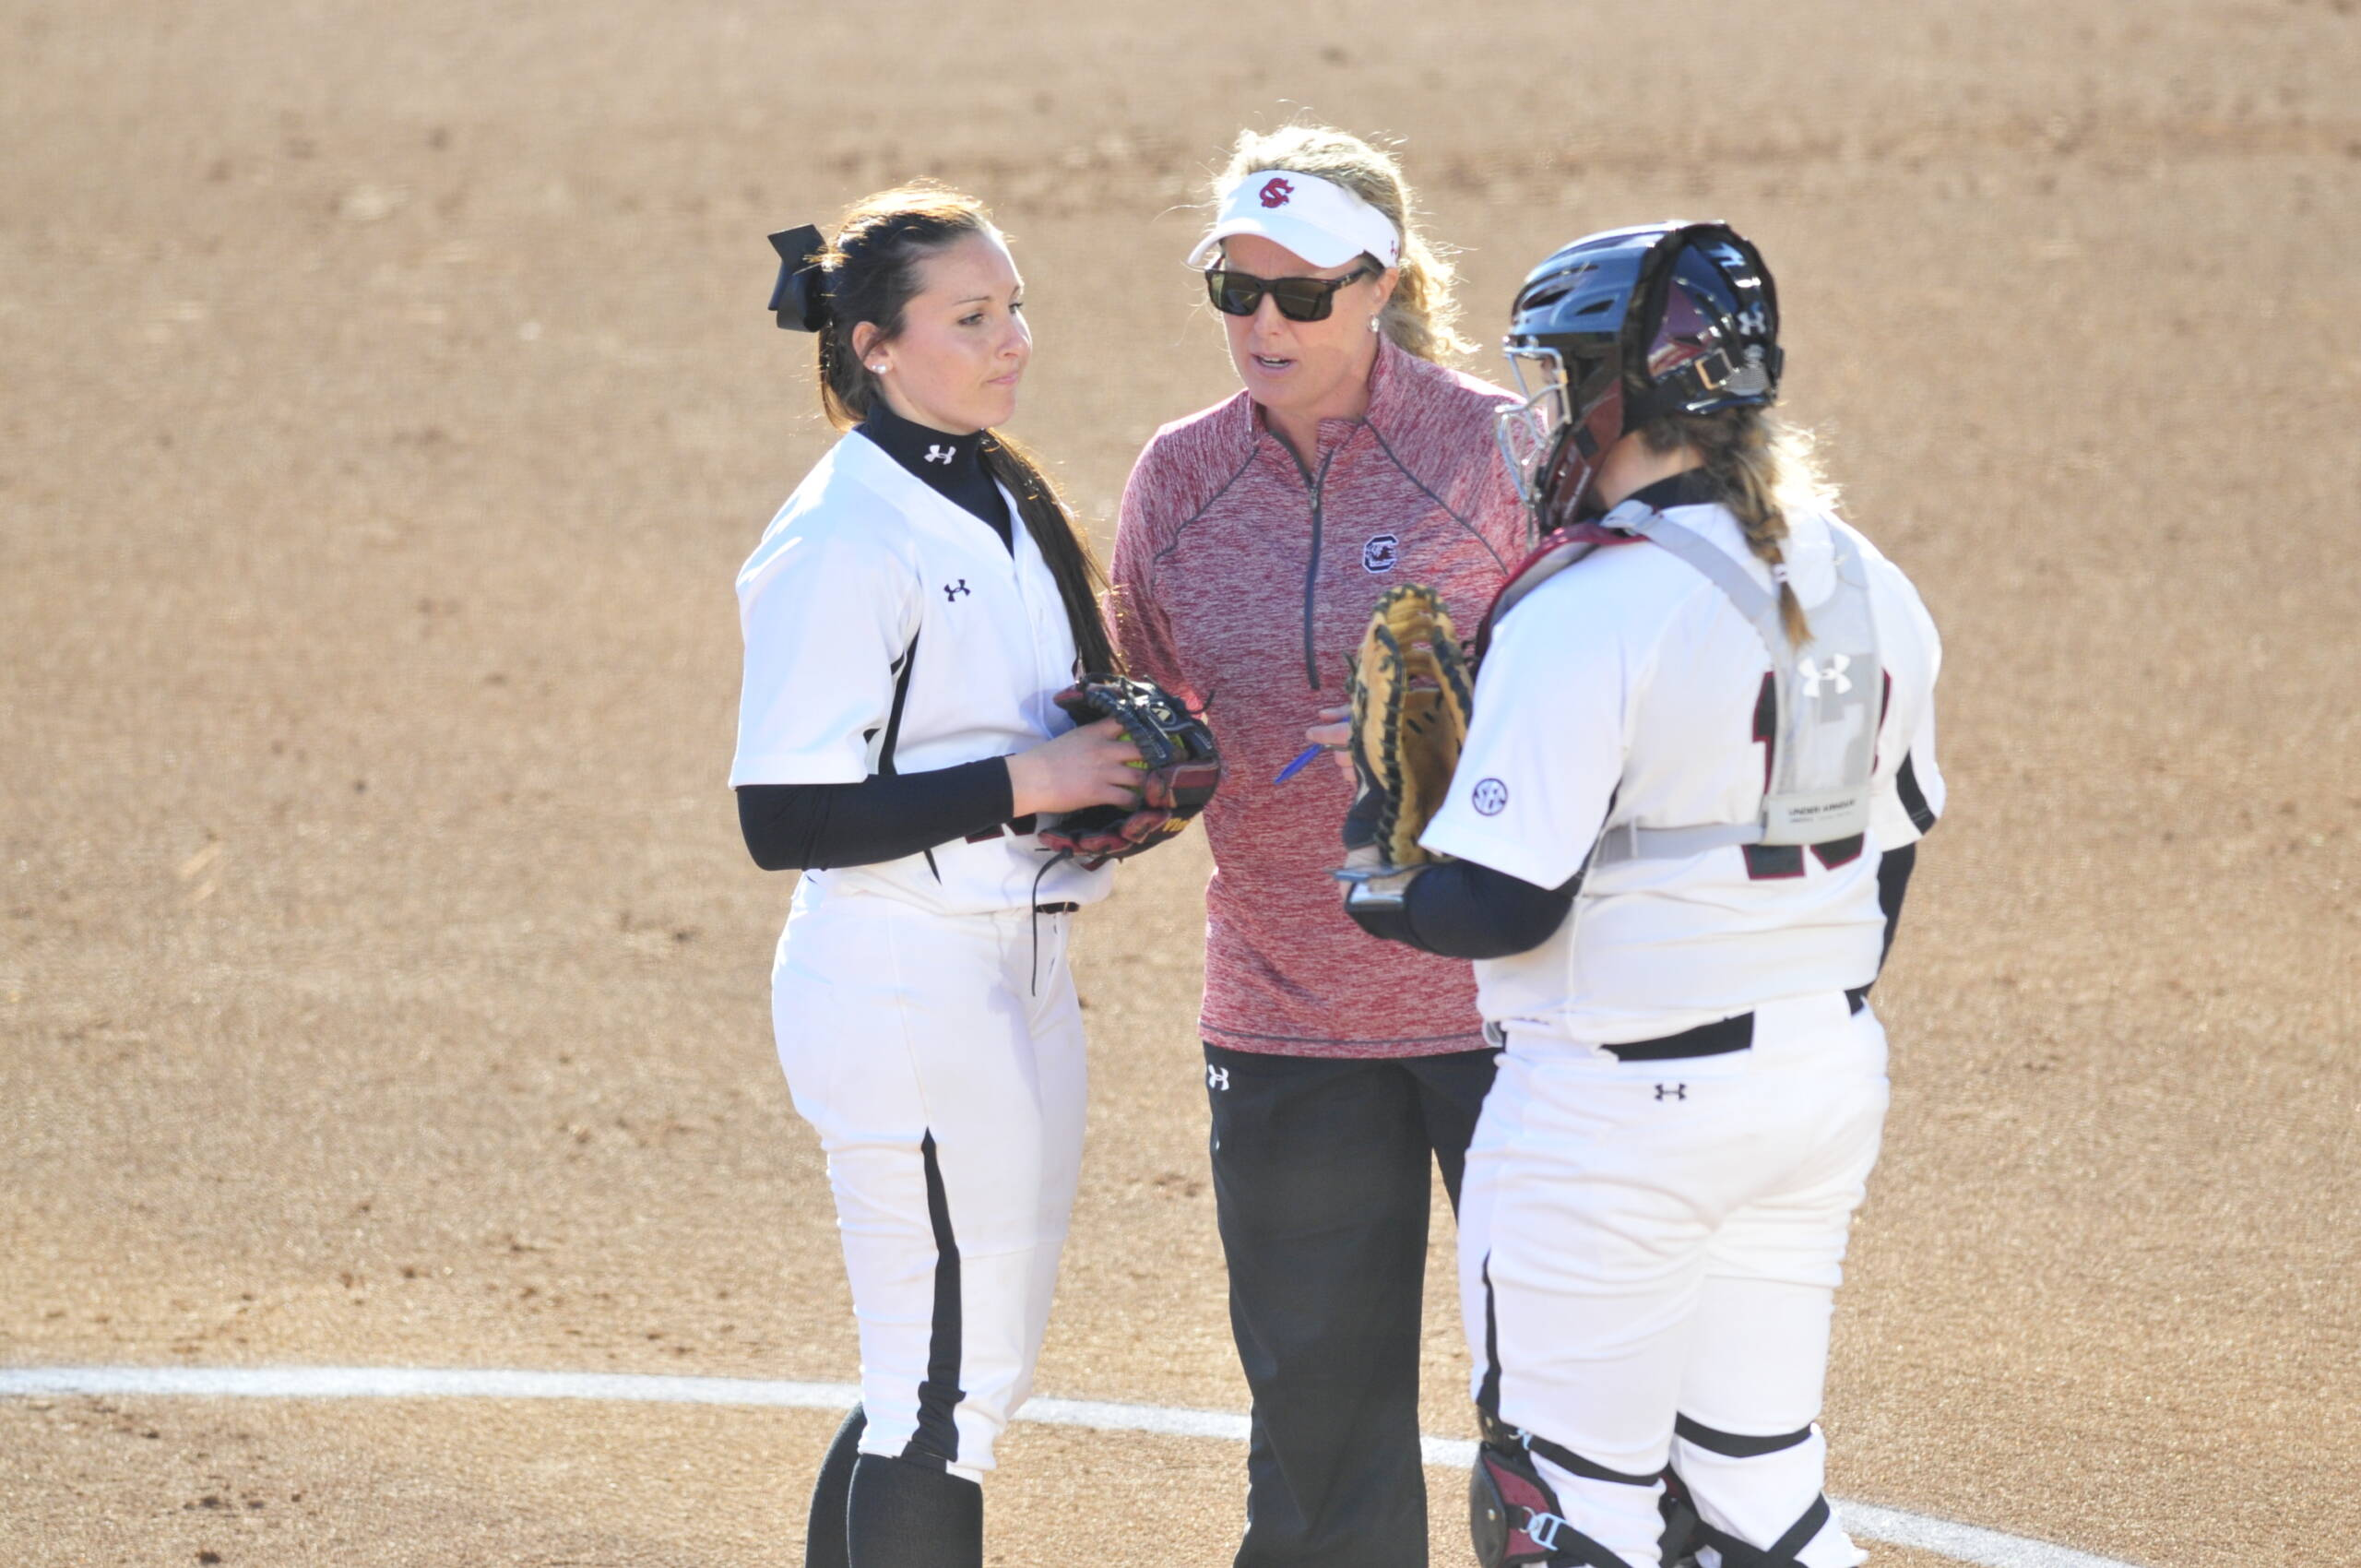 Bev Smith Softball Camps' Winter Clinics Open for Registration